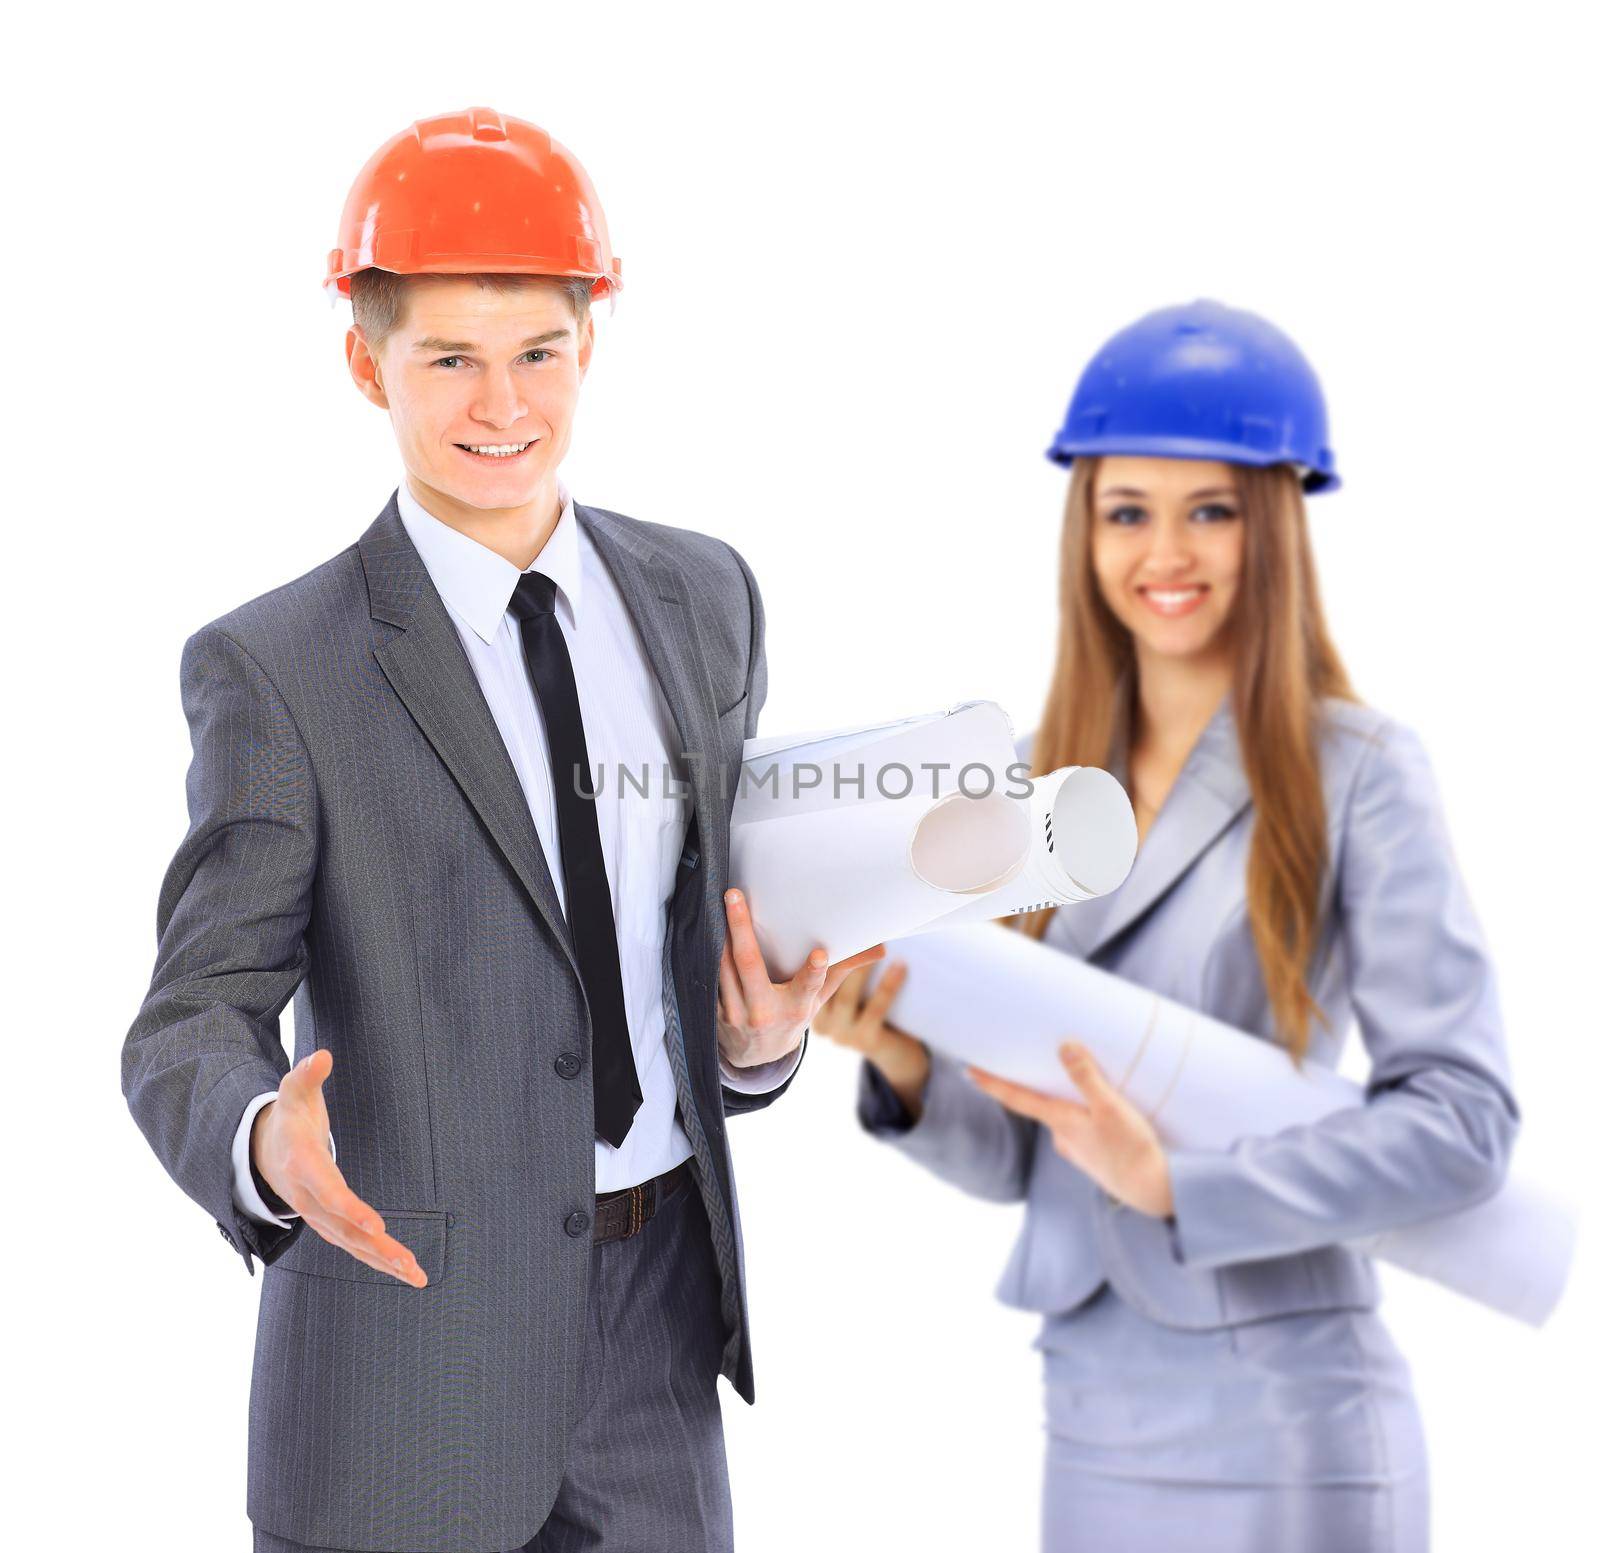 Construction workers group. Isolated over white background.